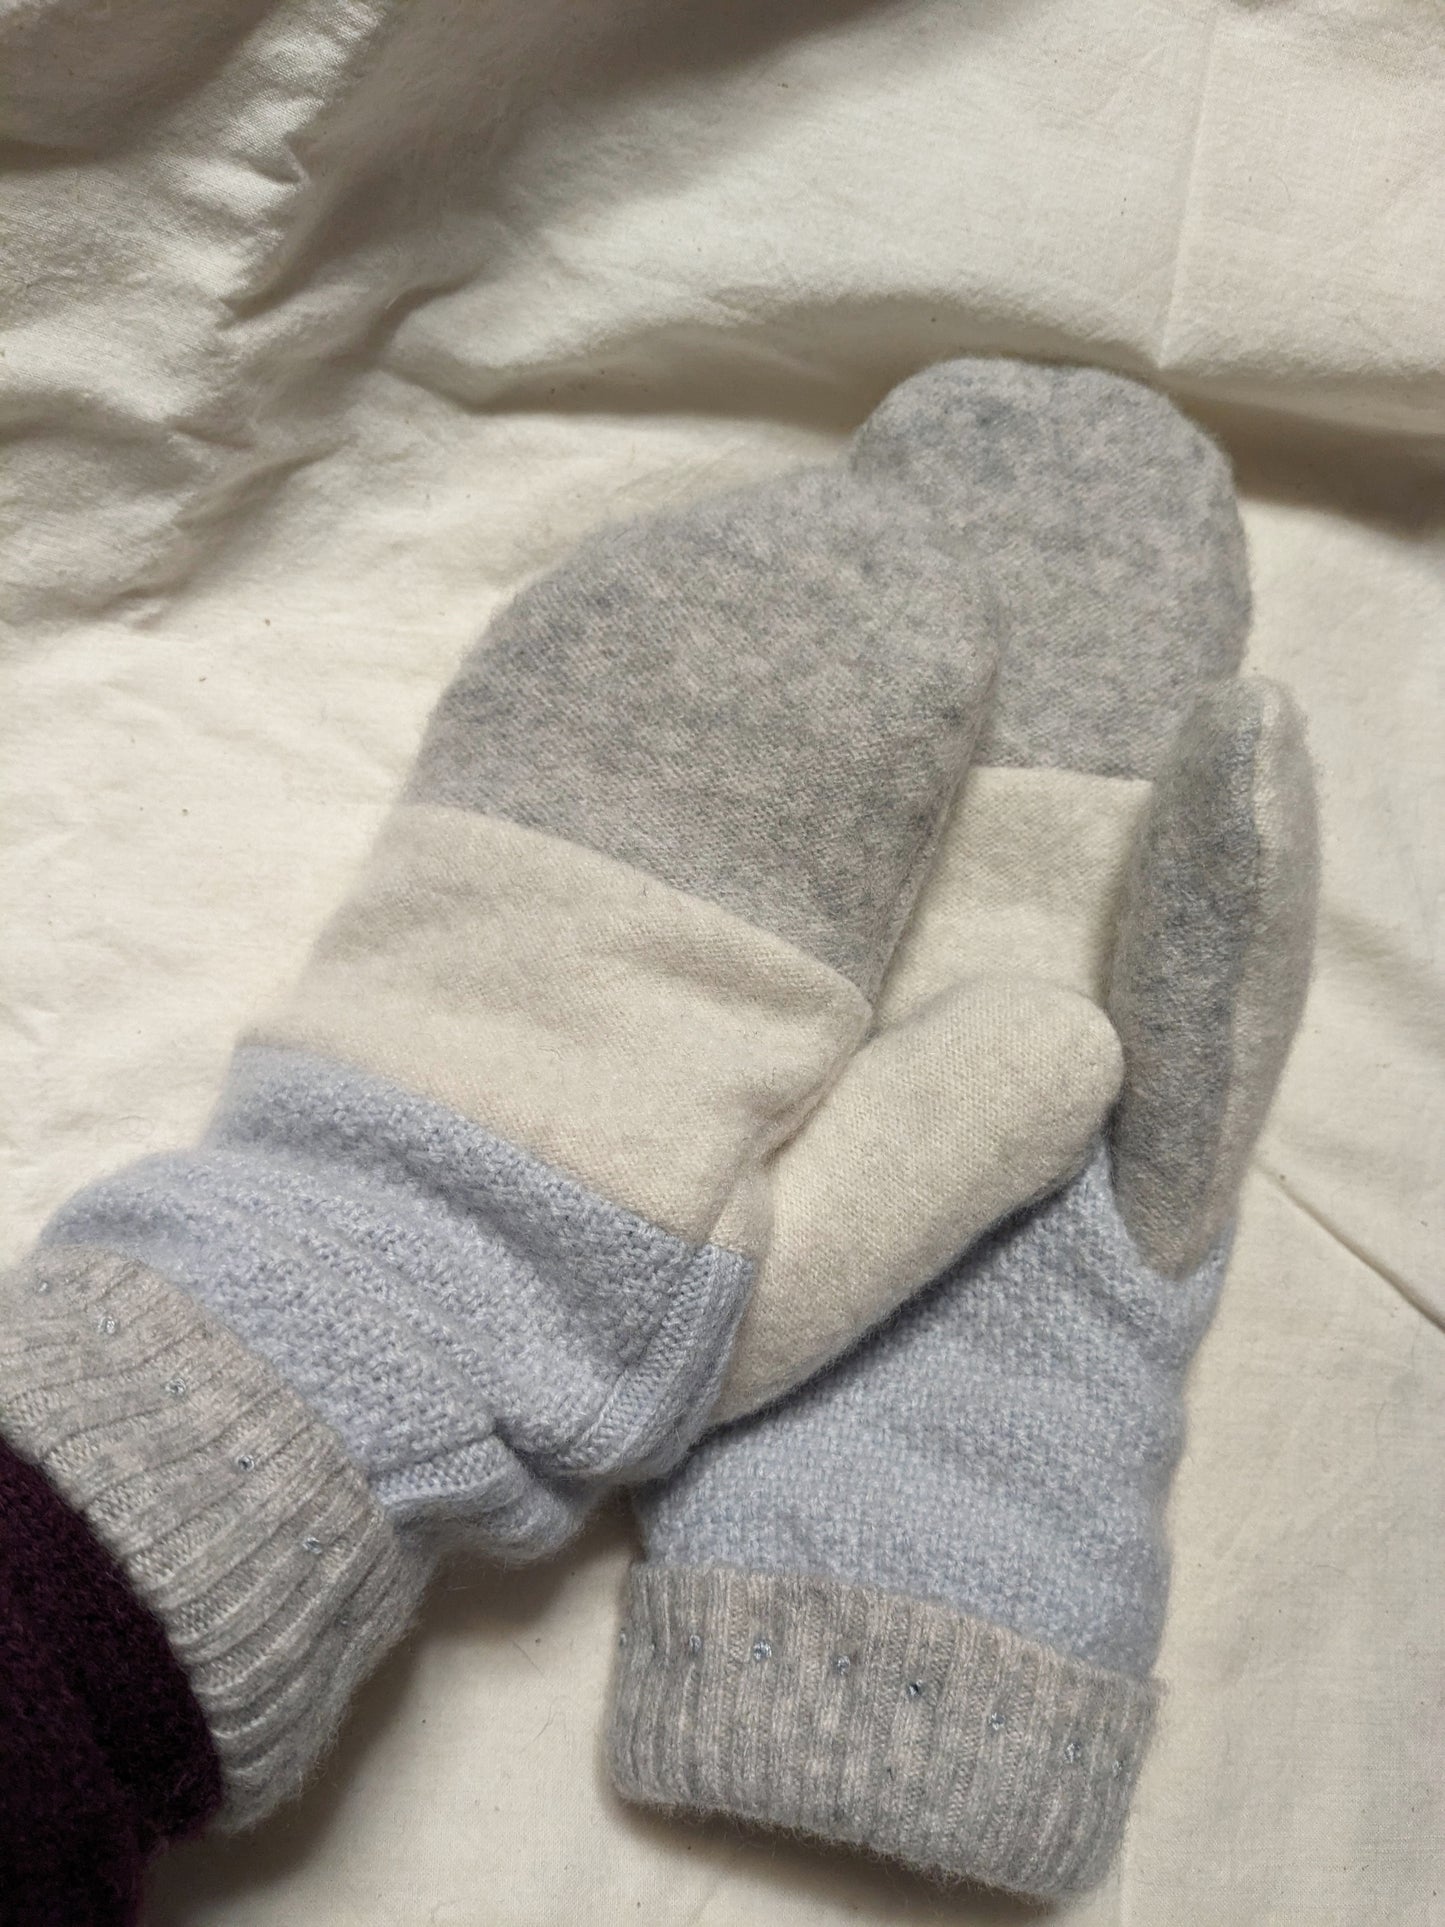 Double Cashmere Mittens - Pale Blue, White and Grey textured